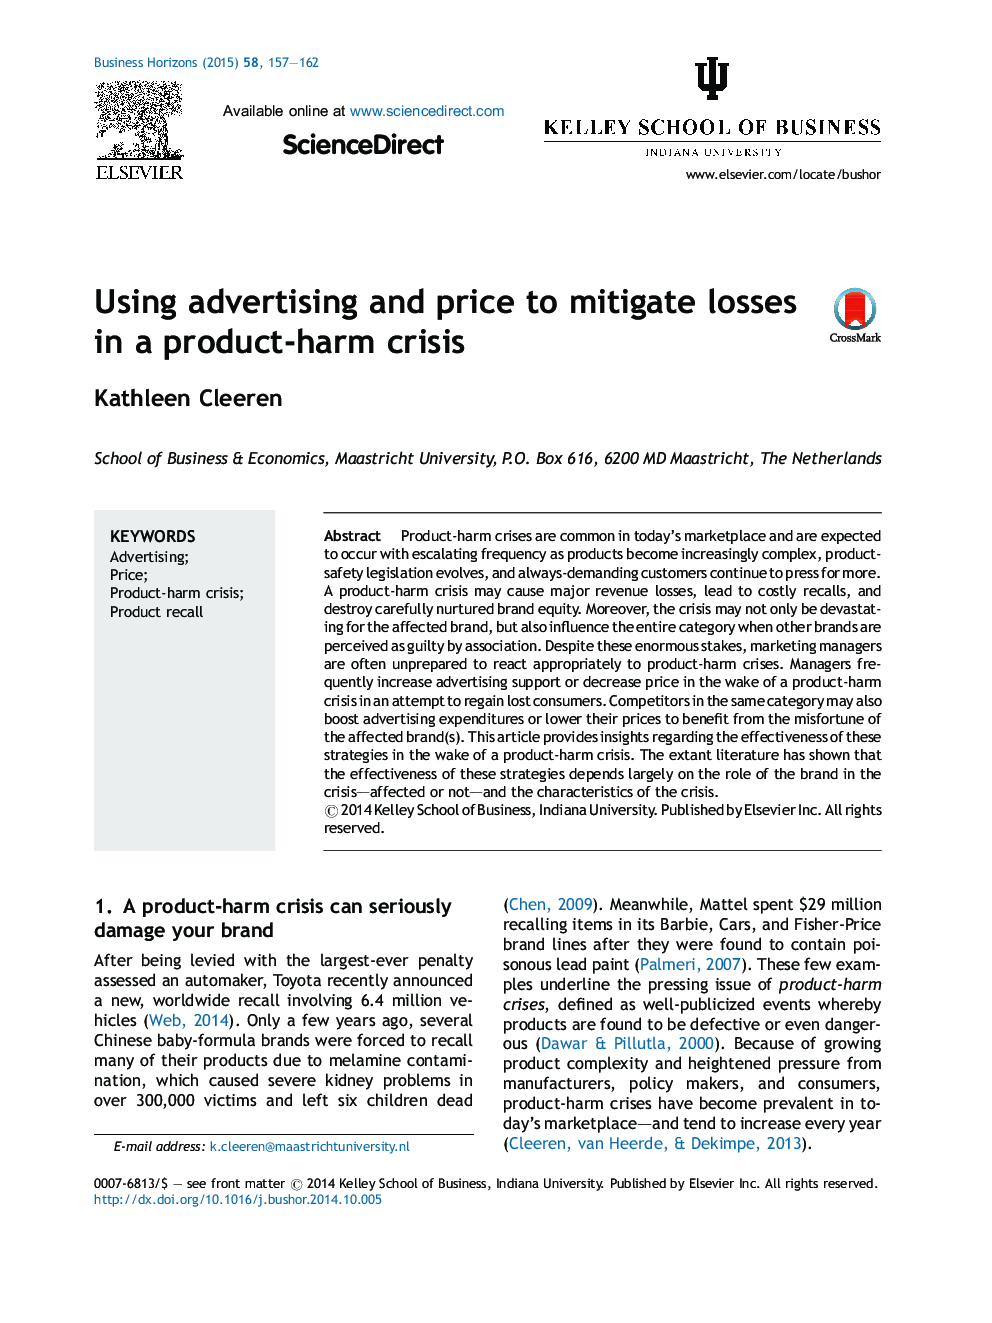 Using advertising and price to mitigate losses in a product-harm crisis